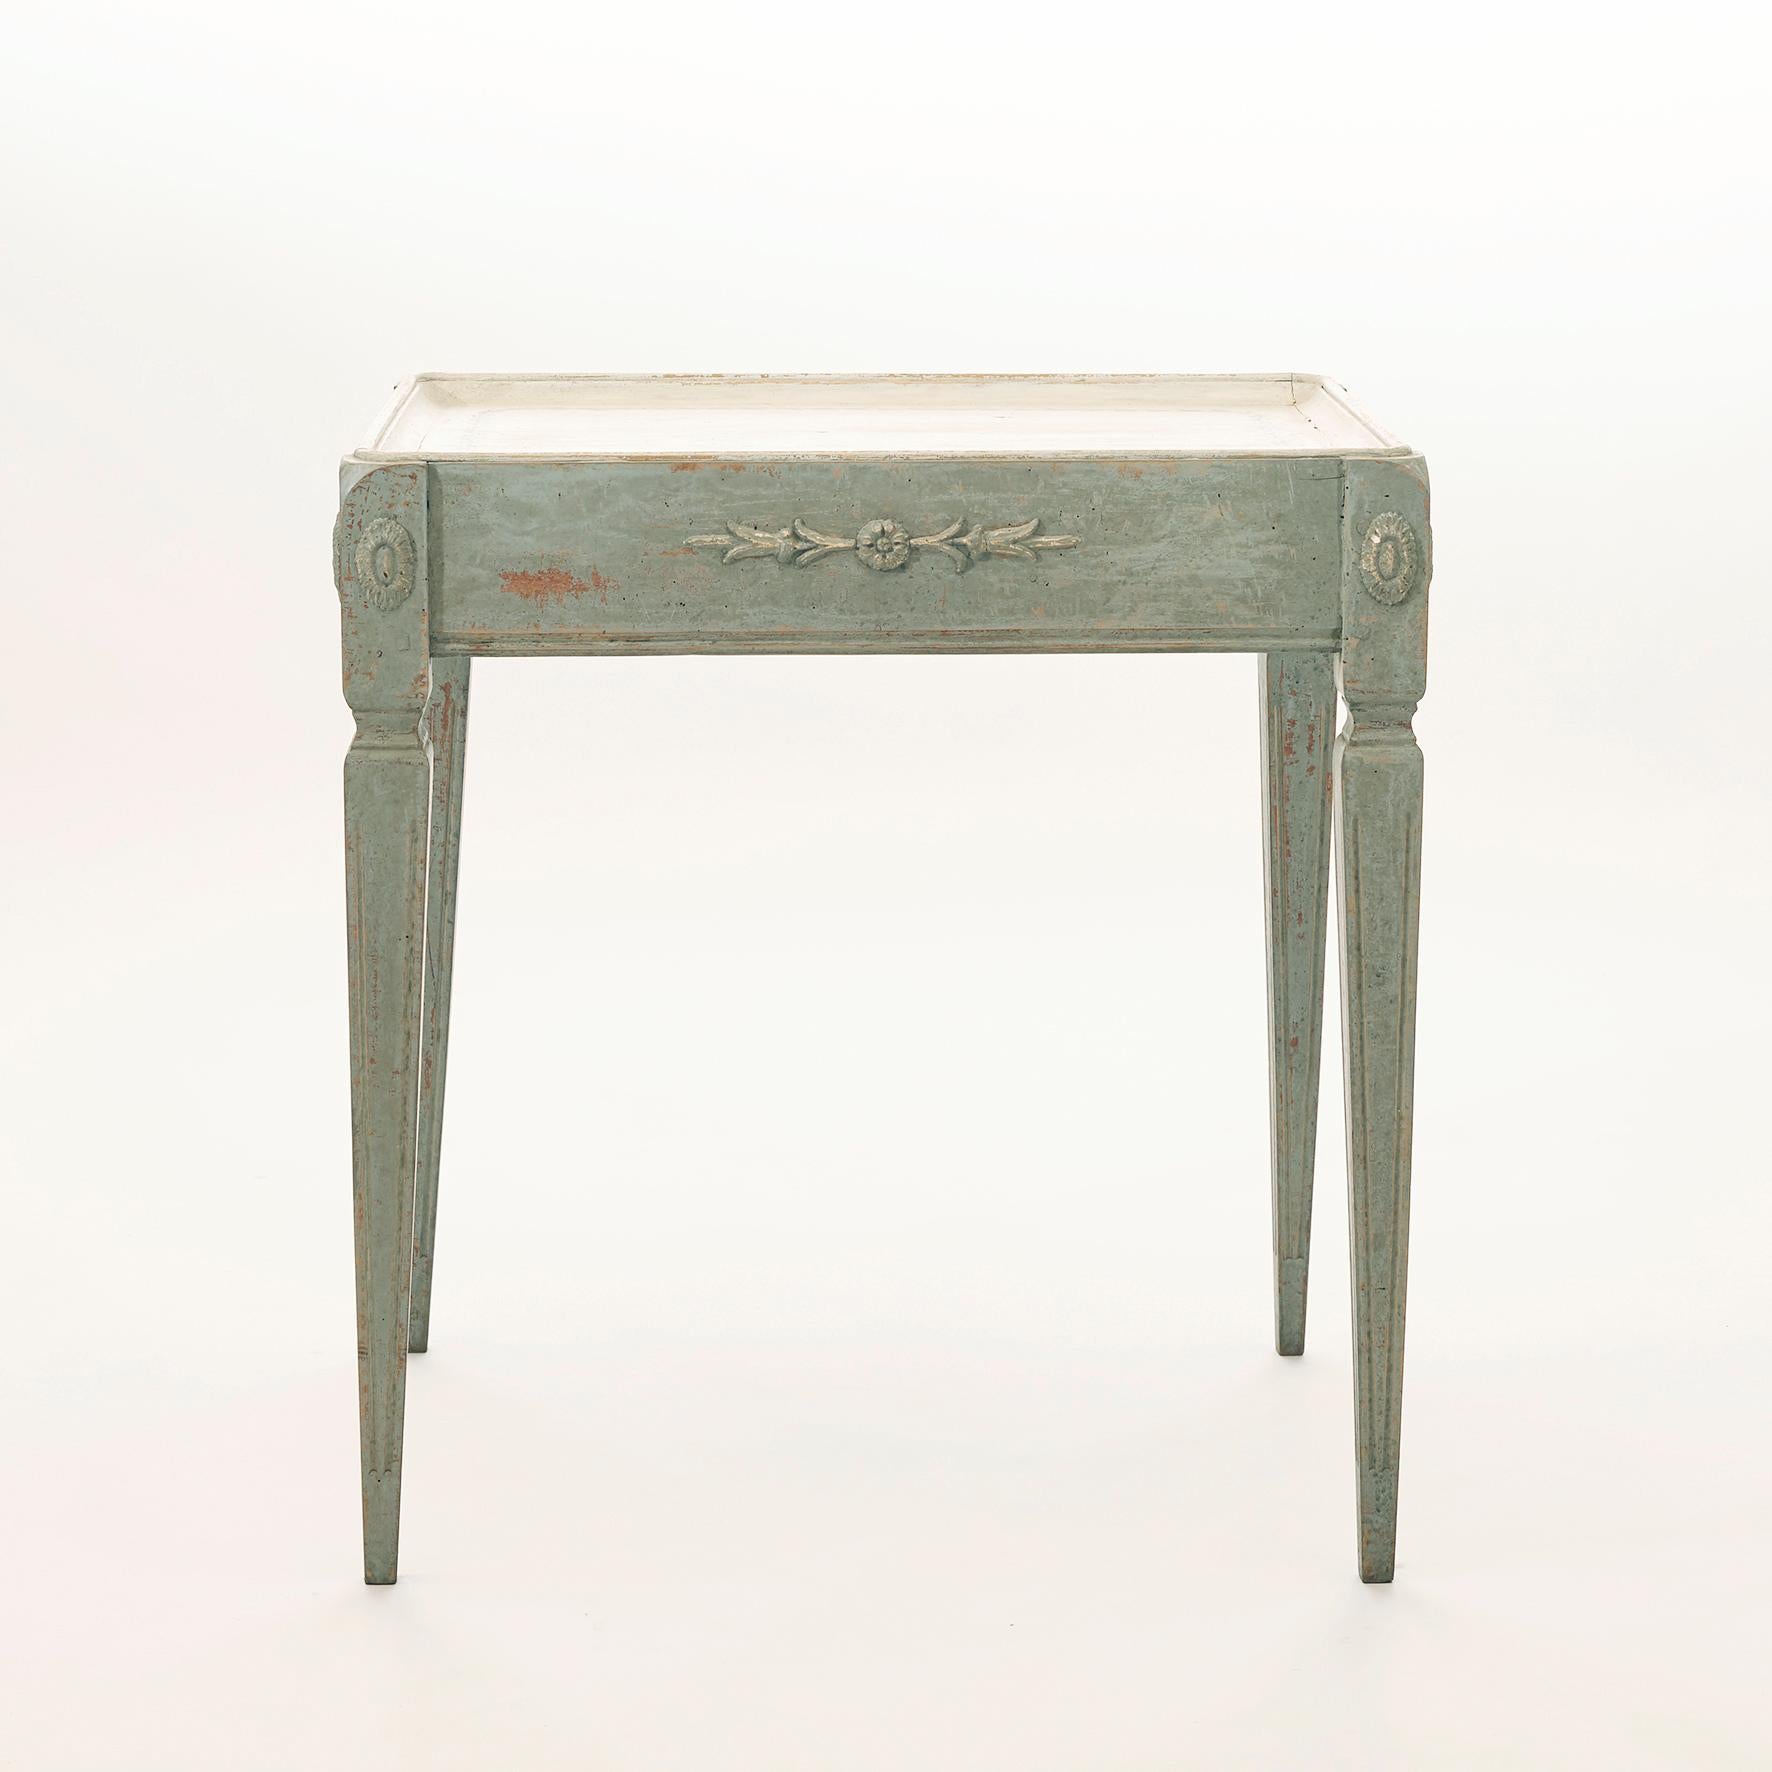 Charming Swedish Gustavian style tray-table, freestanding. Gray painted legs and apron. Richly decorated with carvings to all four sides of apron. Tabletop with flower motif.